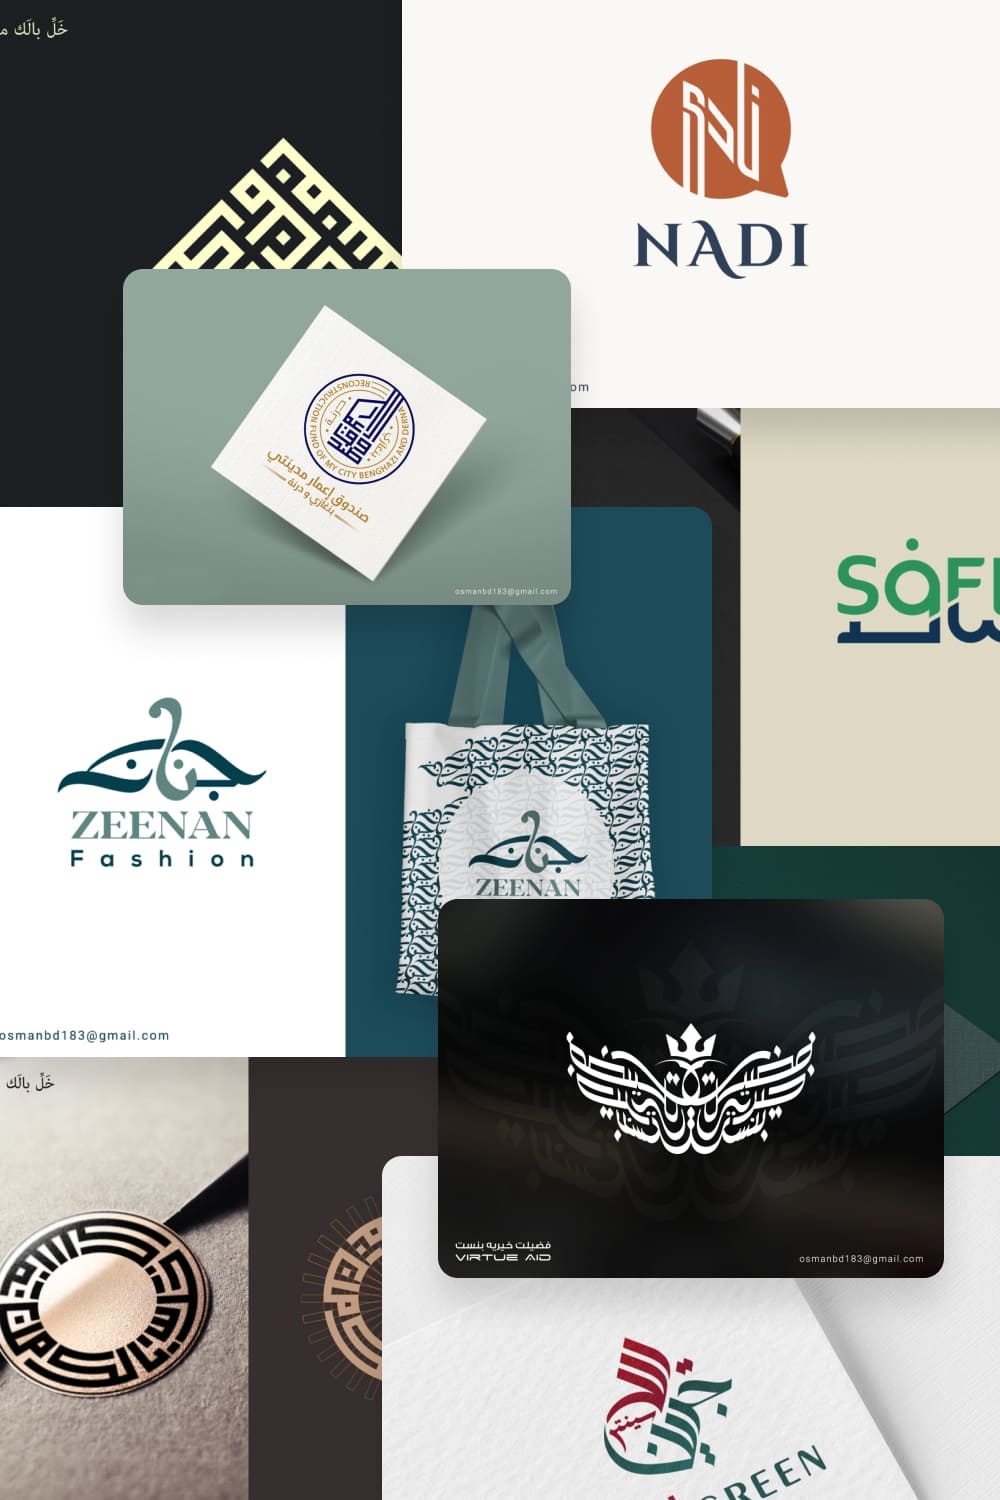 A stylish way to create a logo for your product or brand.